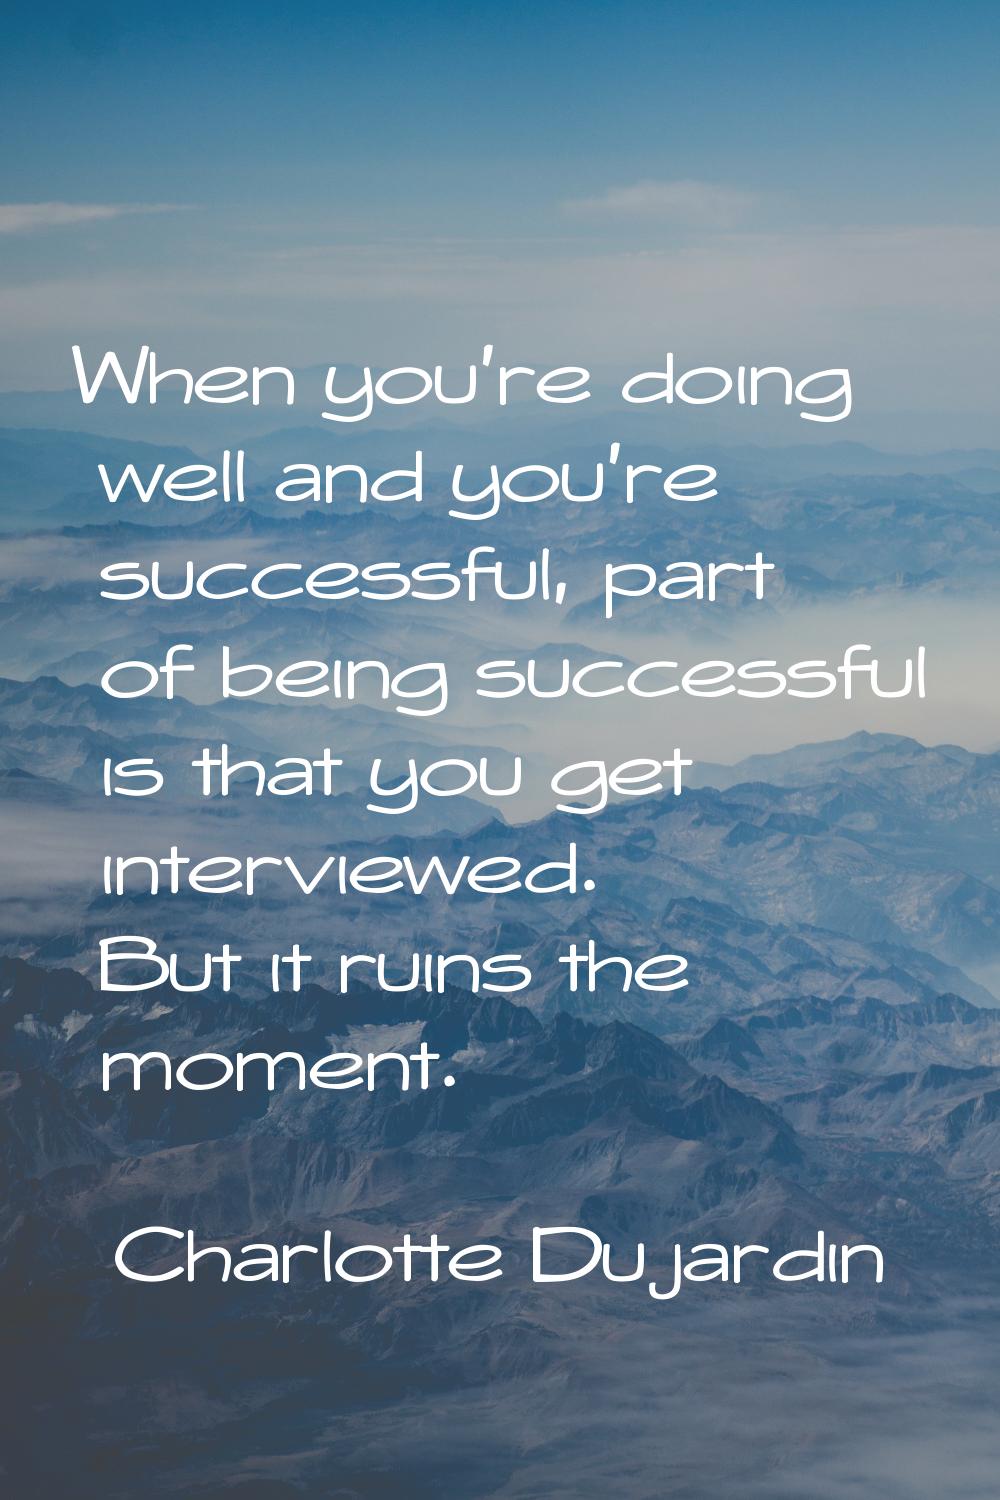 When you're doing well and you're successful, part of being successful is that you get interviewed.